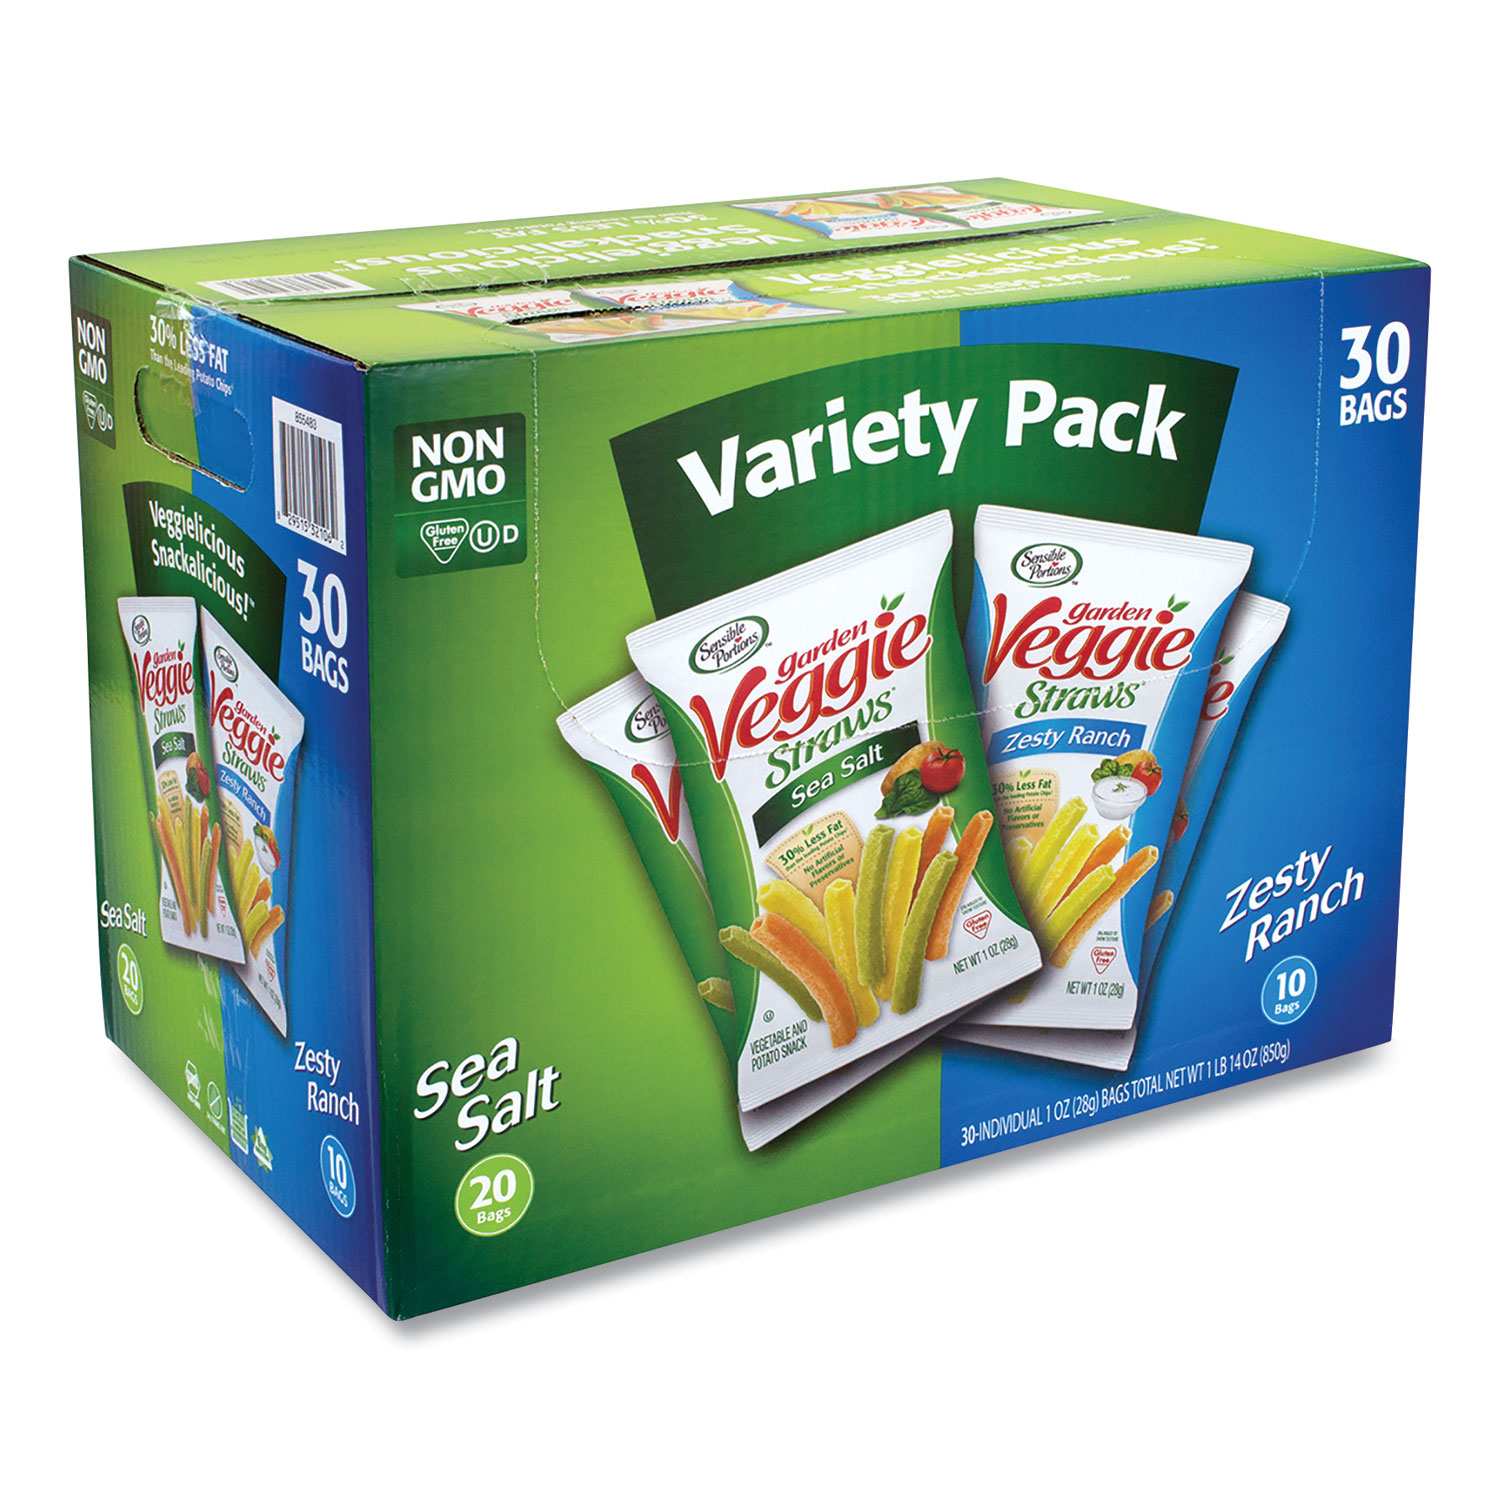 Sensible Portions® Veggie Straws, Sea Salt/Zesty Ranch, 1 oz Bag, 30 Bags/Carton, Free Delivery in 1-4 Business Days